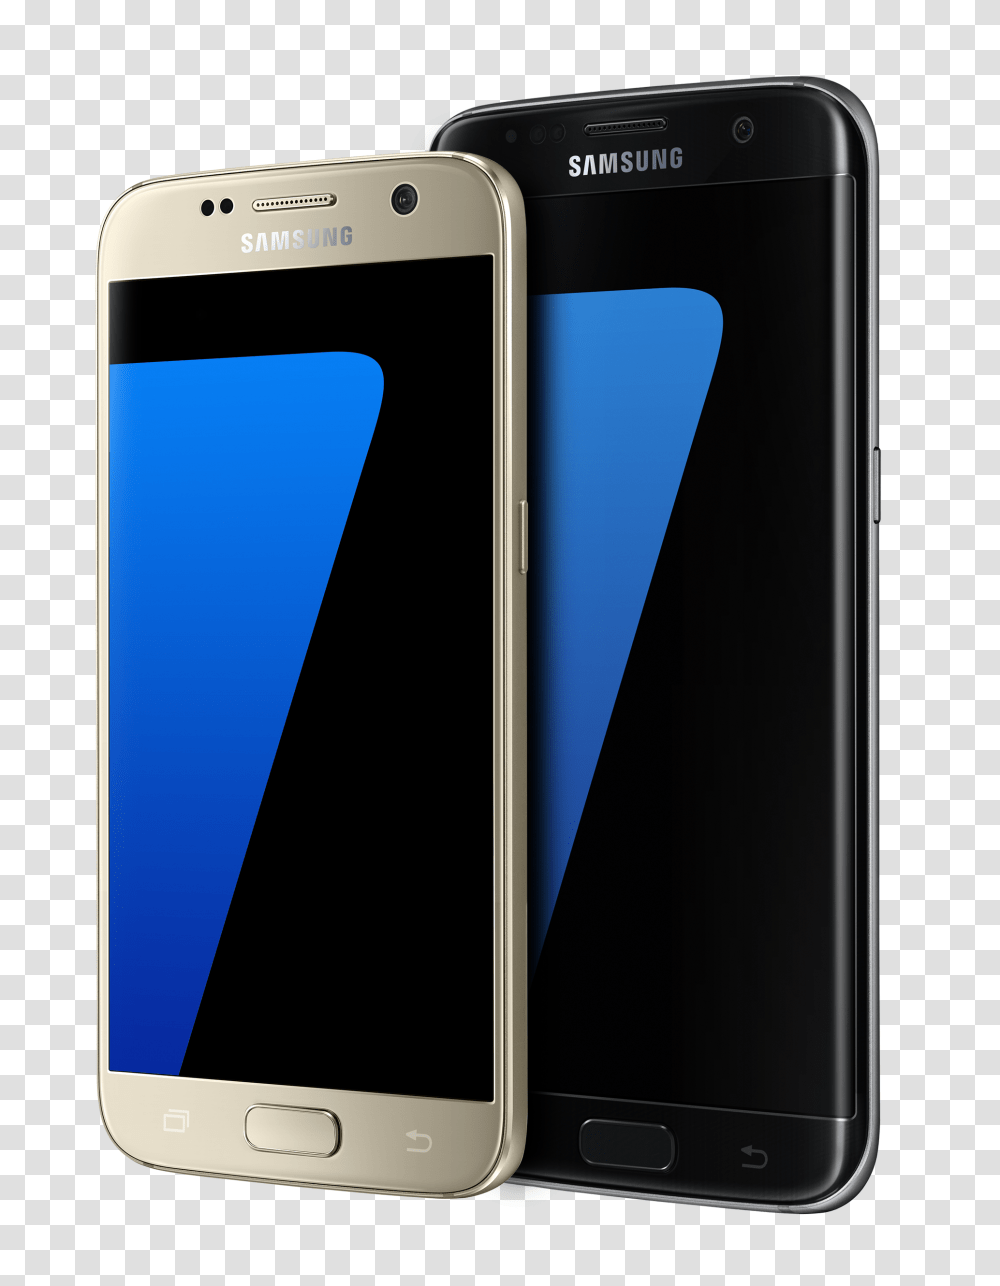 Samsung Galaxy And Galaxy Edge Official With New Camera, Mobile Phone, Electronics, Cell Phone, Iphone Transparent Png